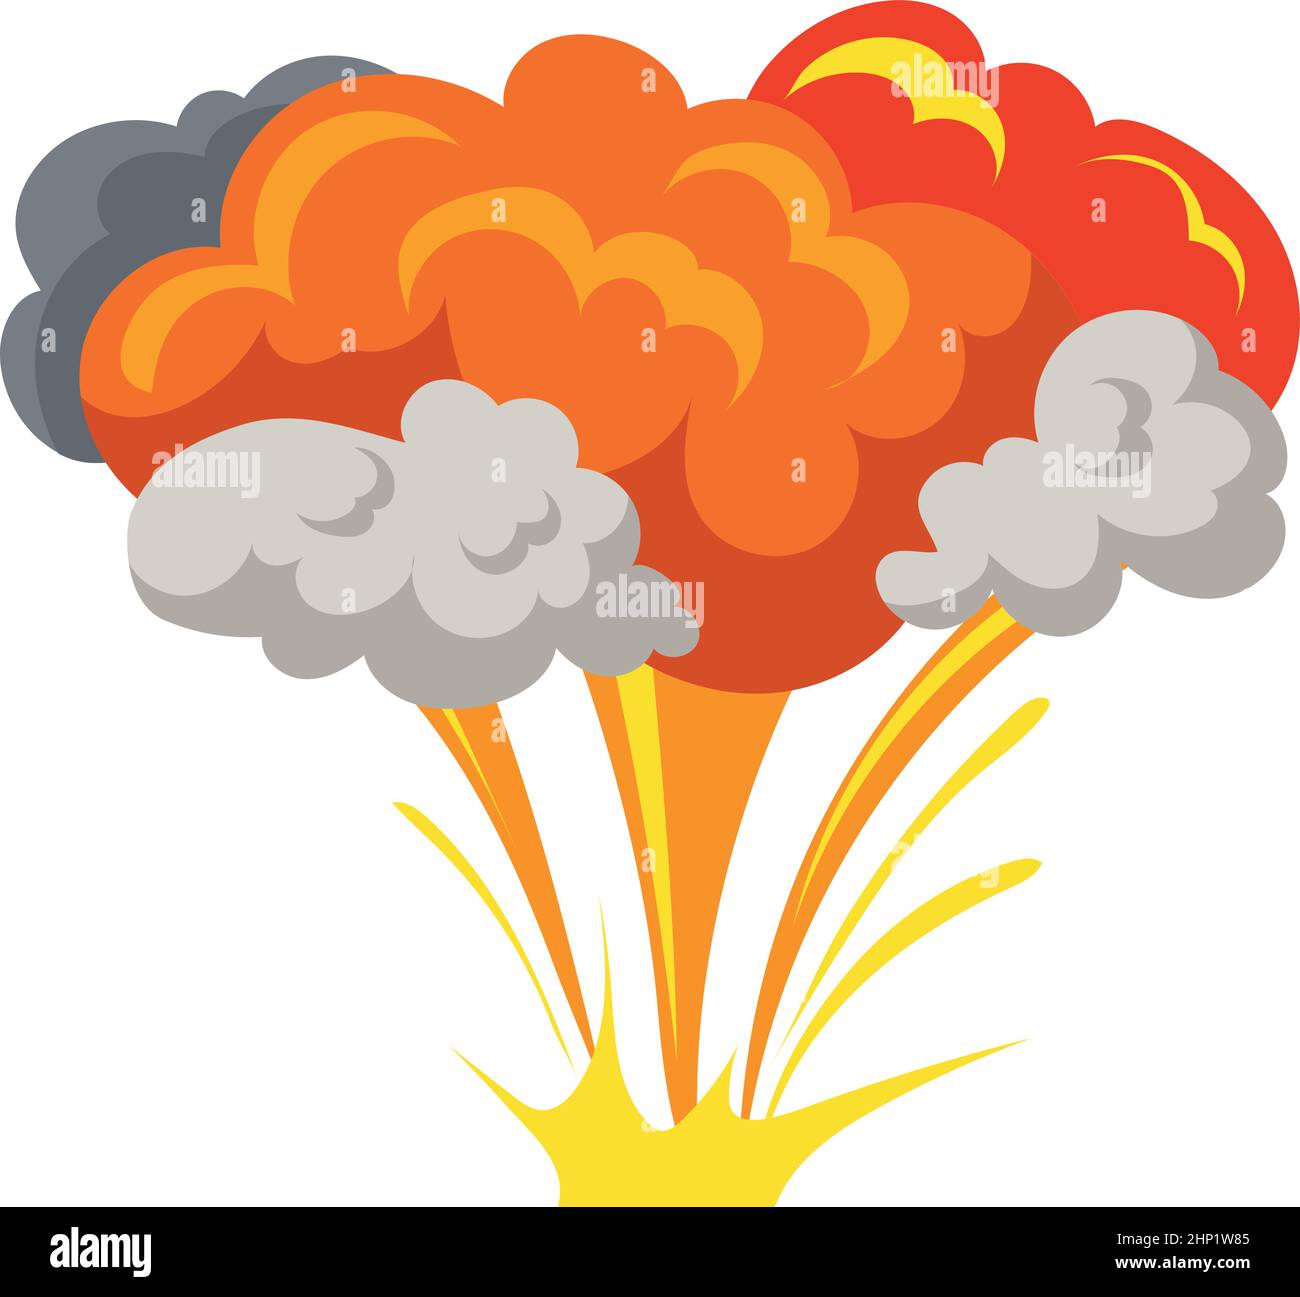 Bomb explosion effect. Fire smoke cloud in cartoon style isolated on white background Stock Vector